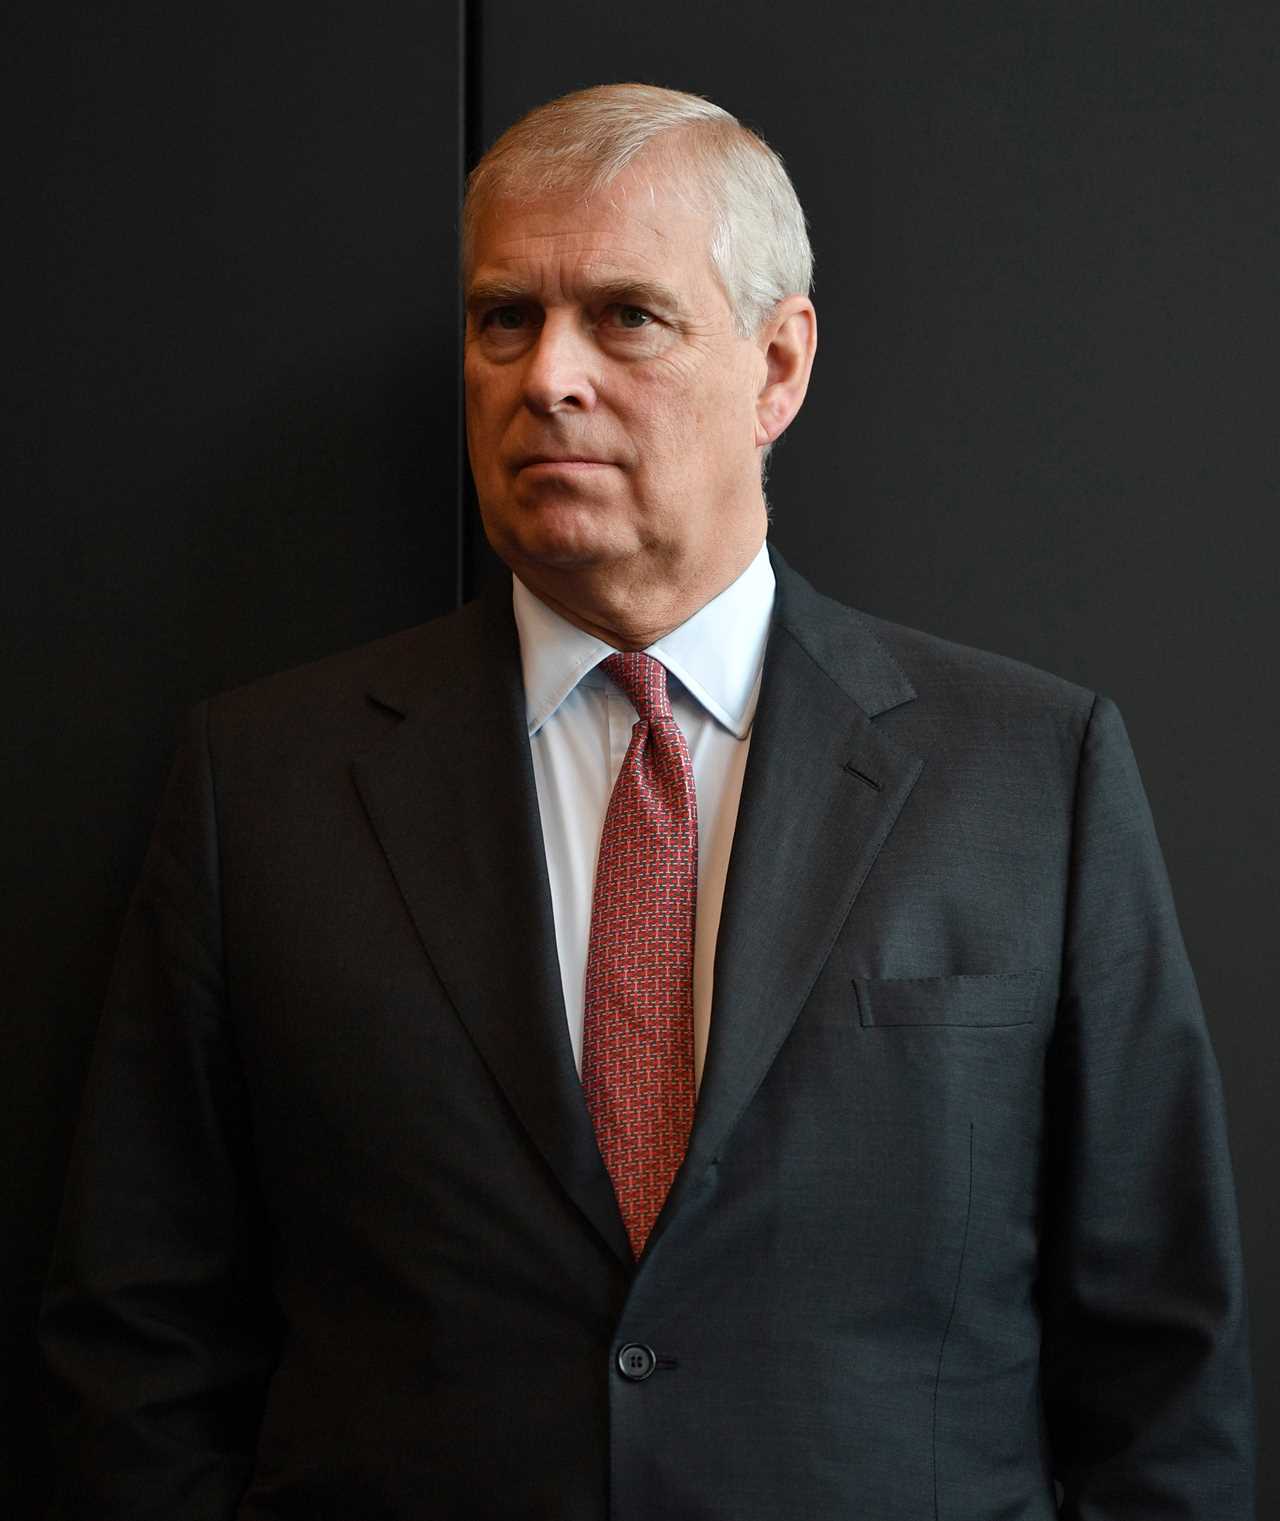 Prince Andrew becomes the ‘Millwall’ of Royal Family, source close to Duke says